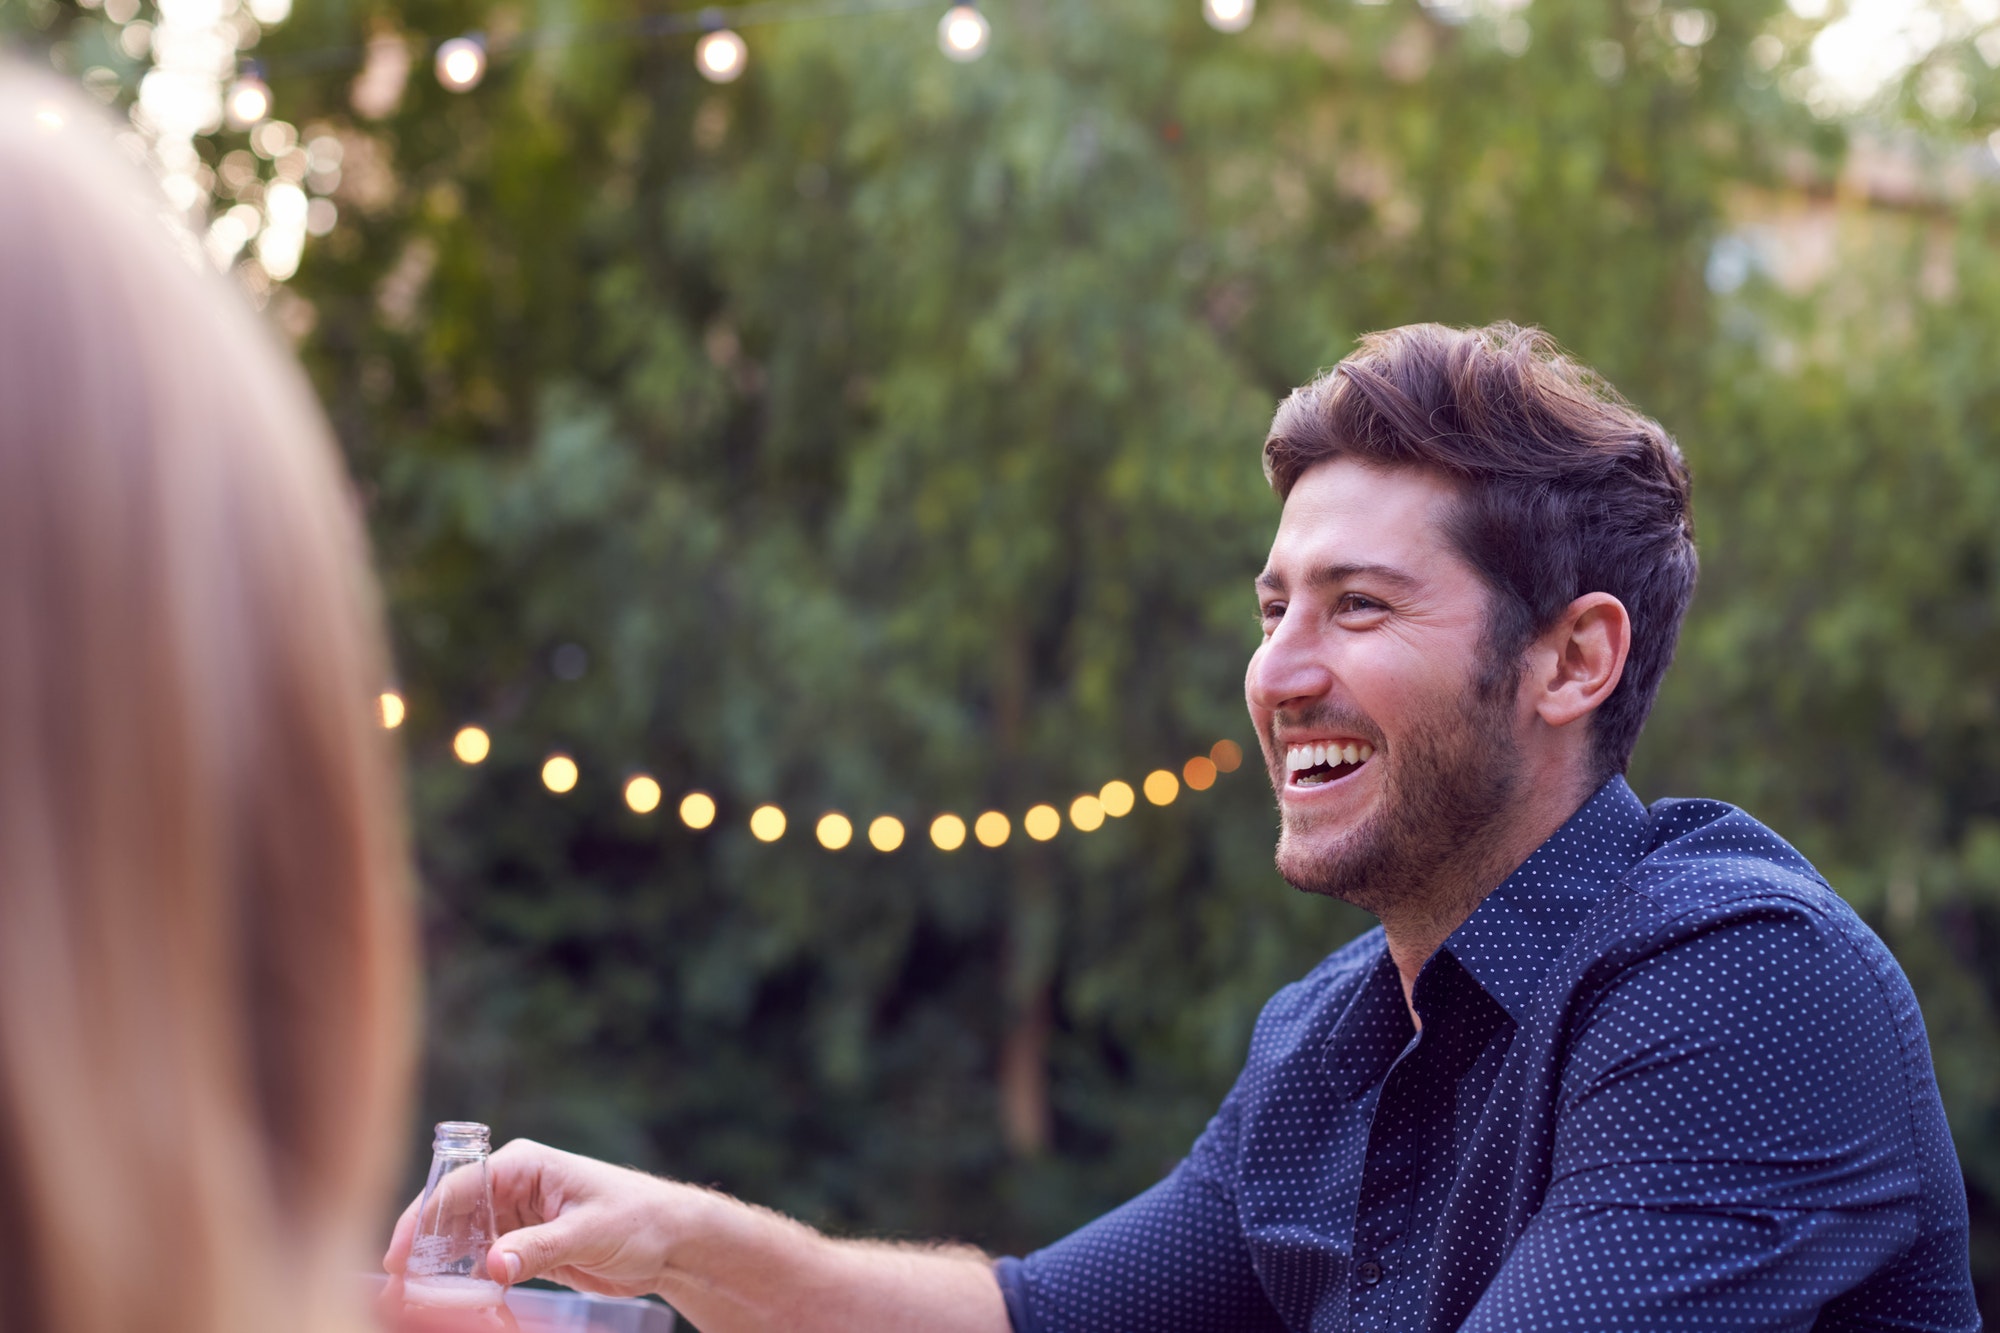 Man With Beer In Garden At Home With Friends Enjoying Summer Garden Party